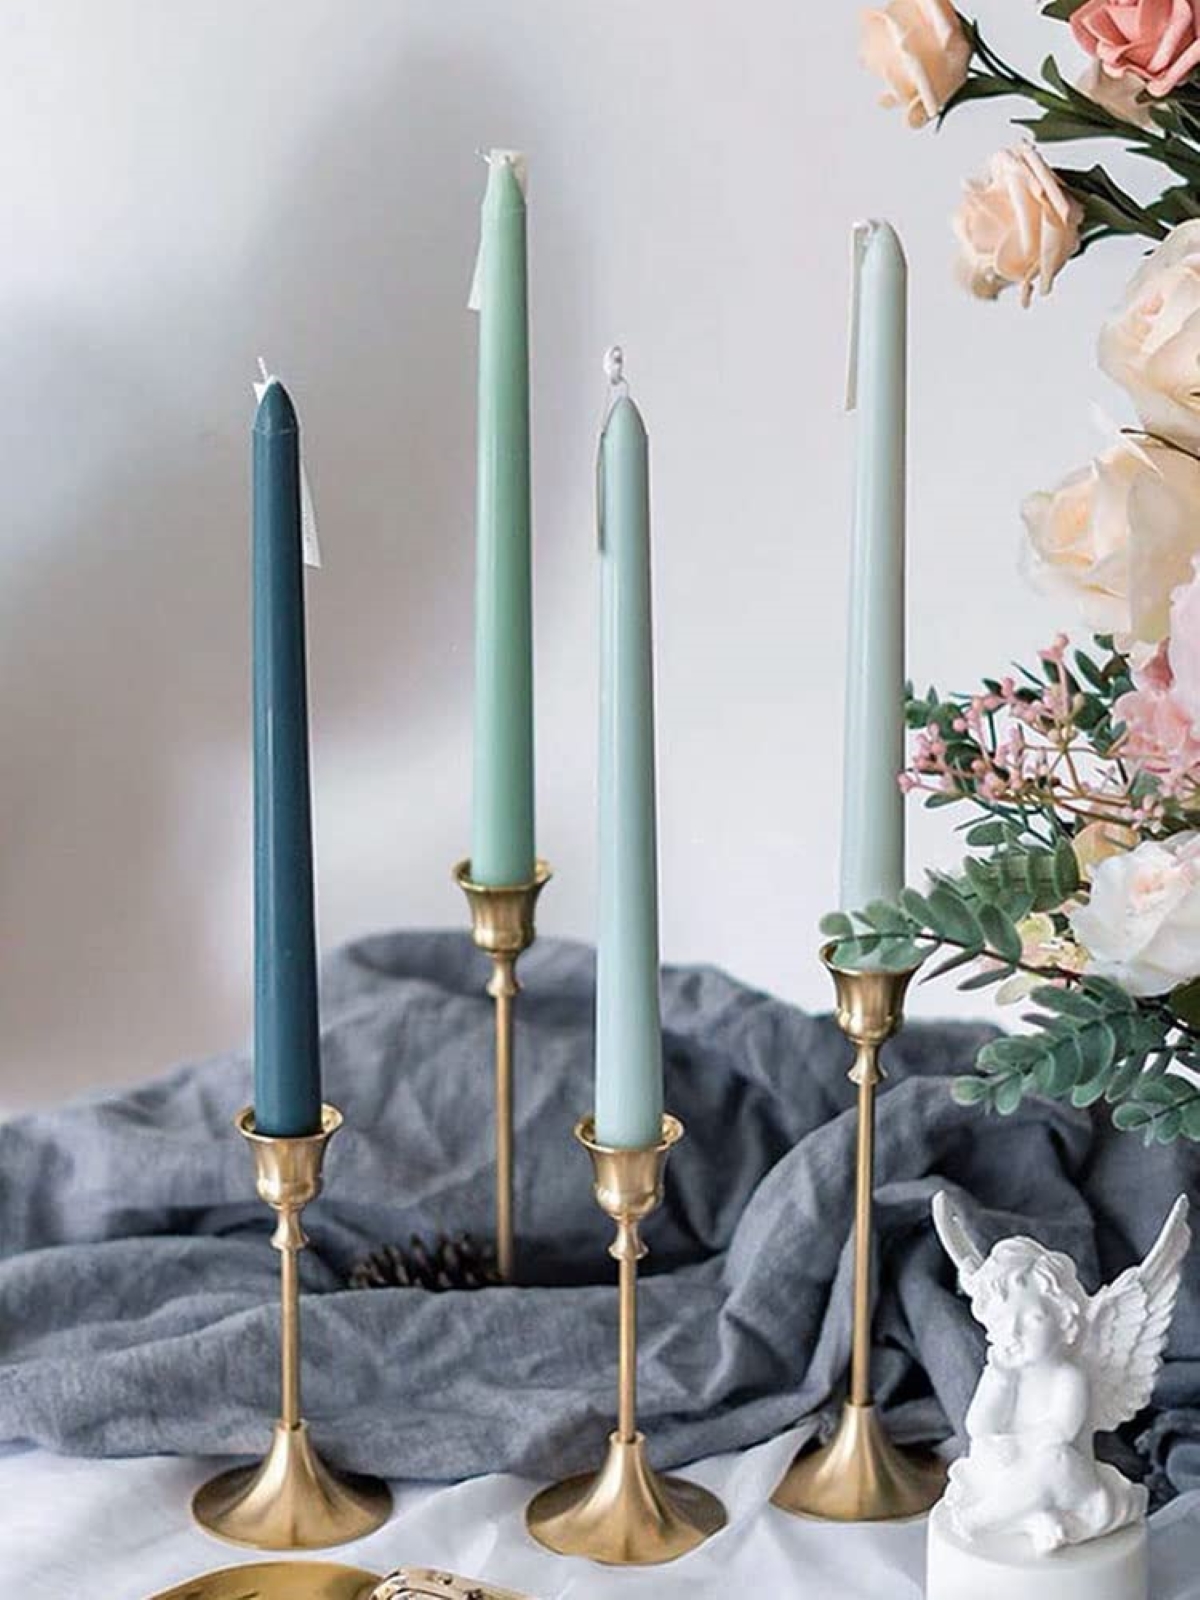 decor with candles - long tapered candles in gold inserts